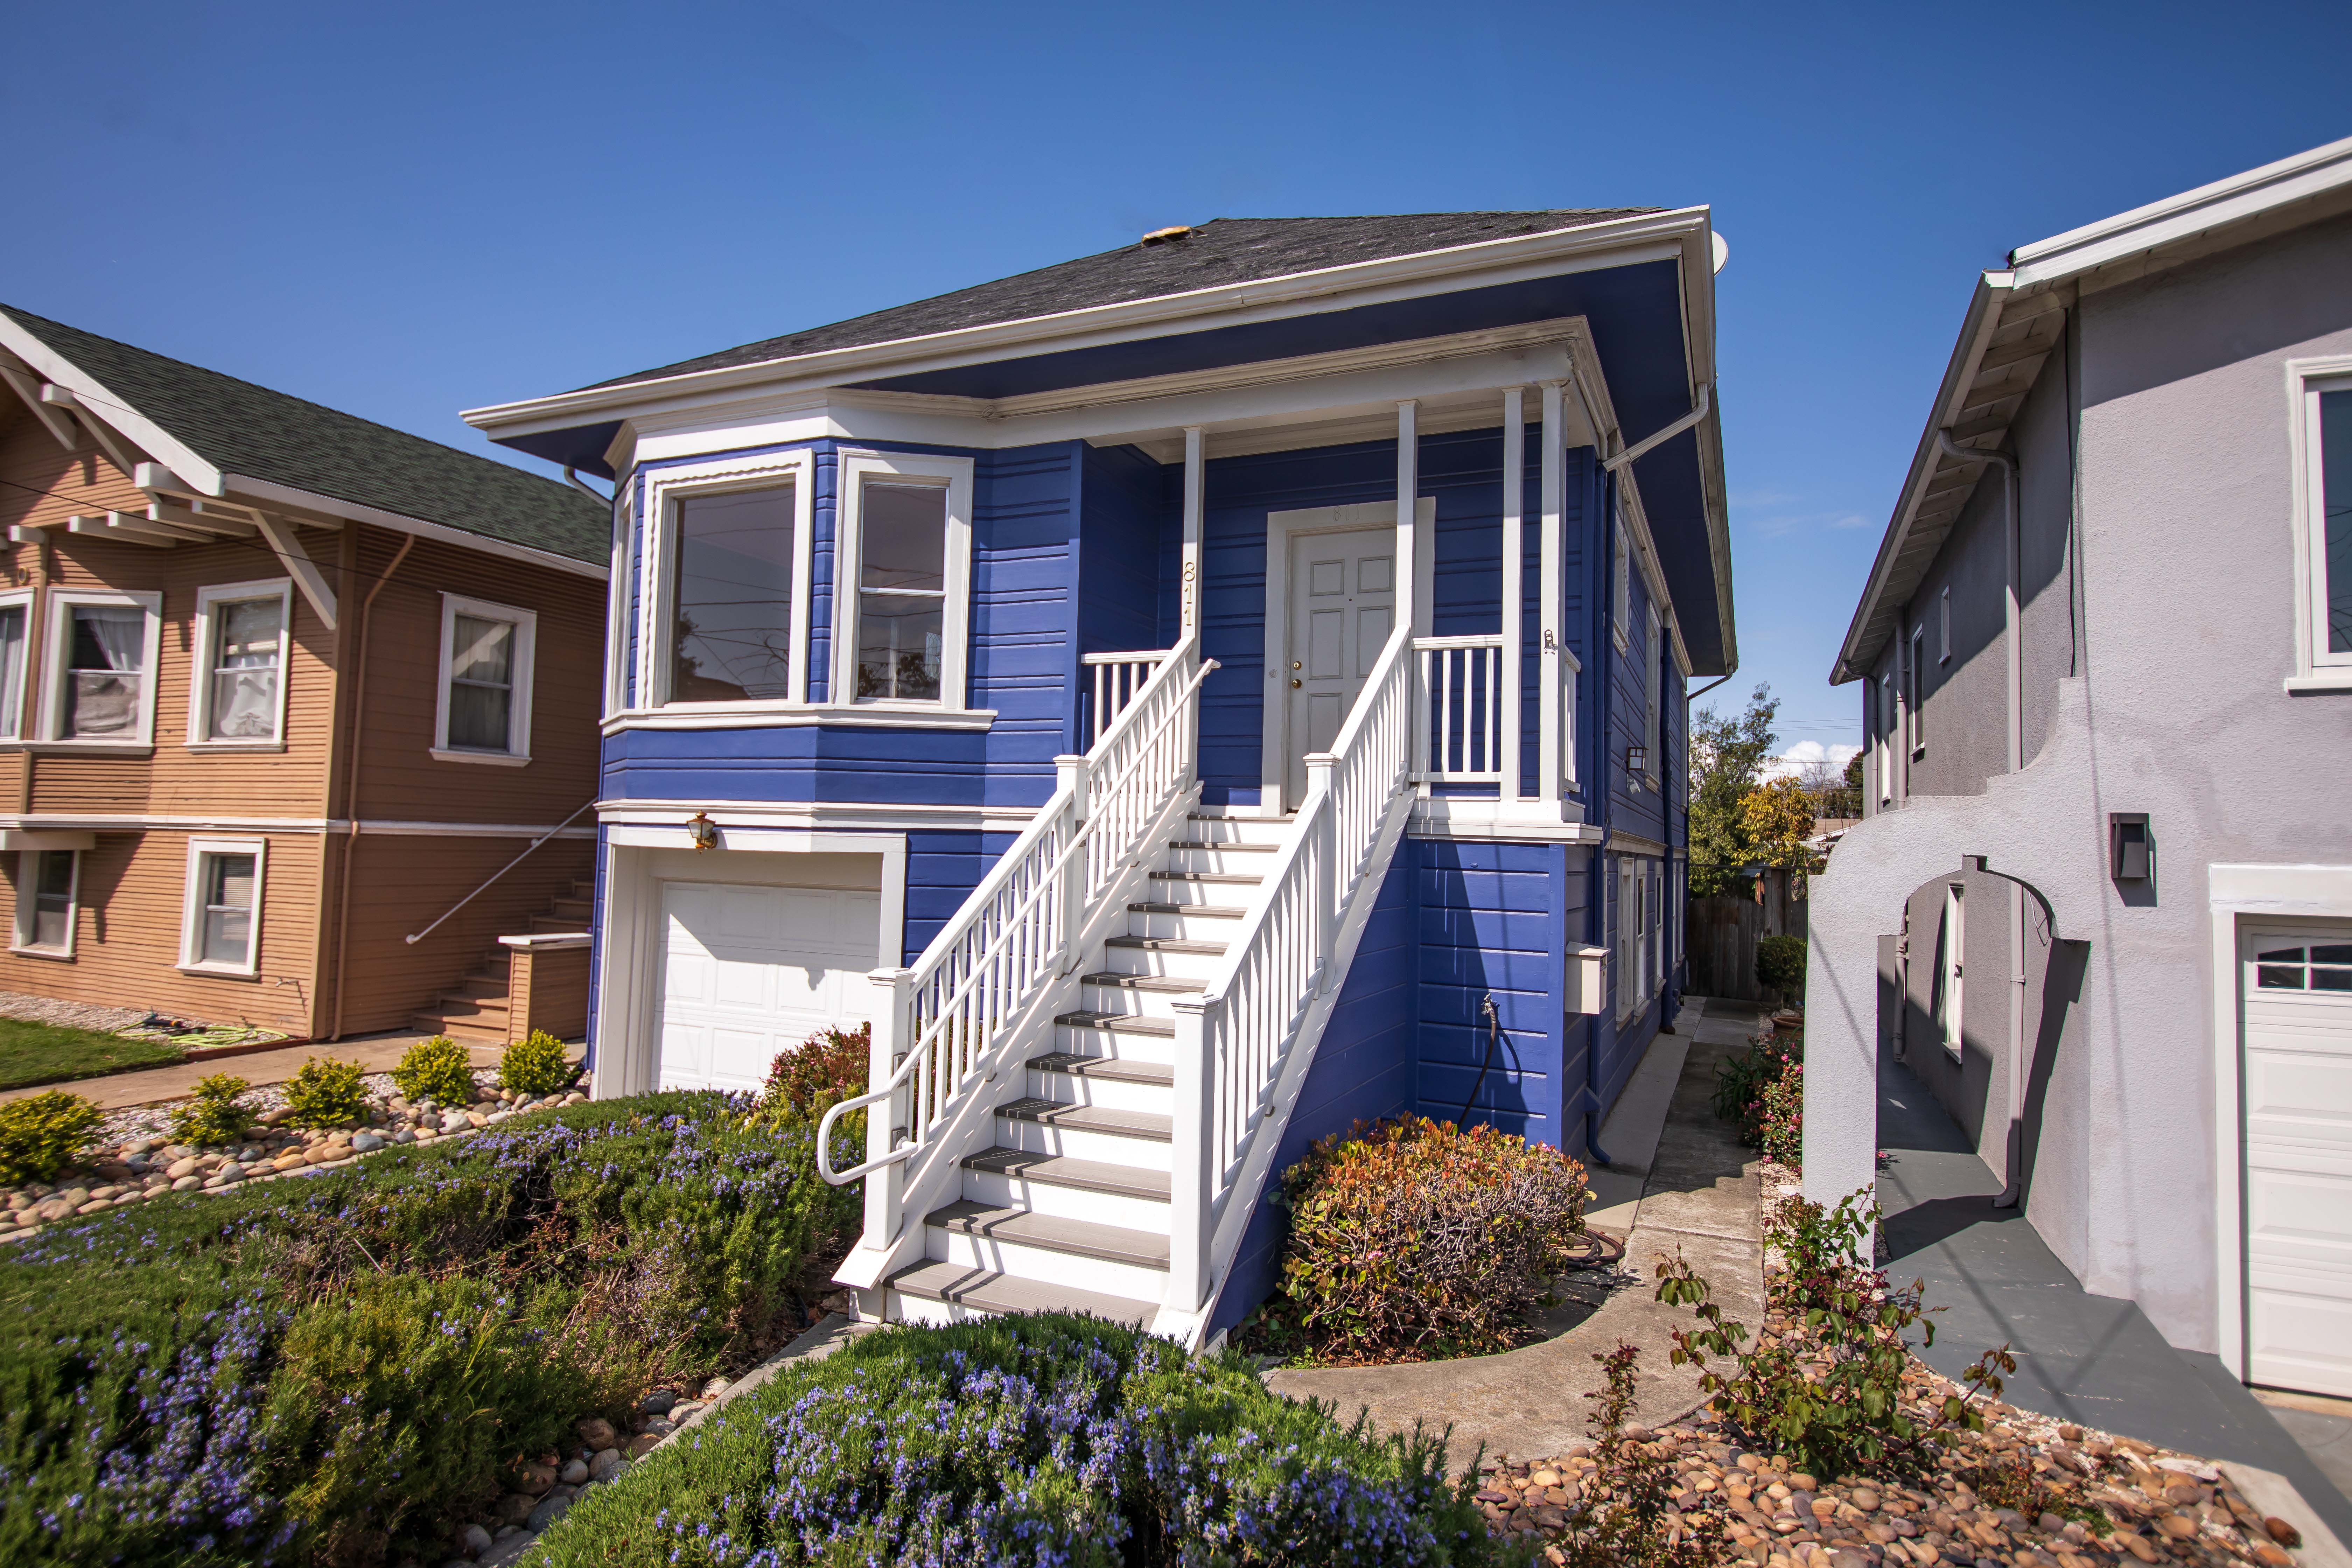 811 Haight Ave, Alameda, California 94501, 3 Bedrooms Bedrooms, ,2.5 BathroomsBathrooms,Single Family,Past Sales,Haight ,1215